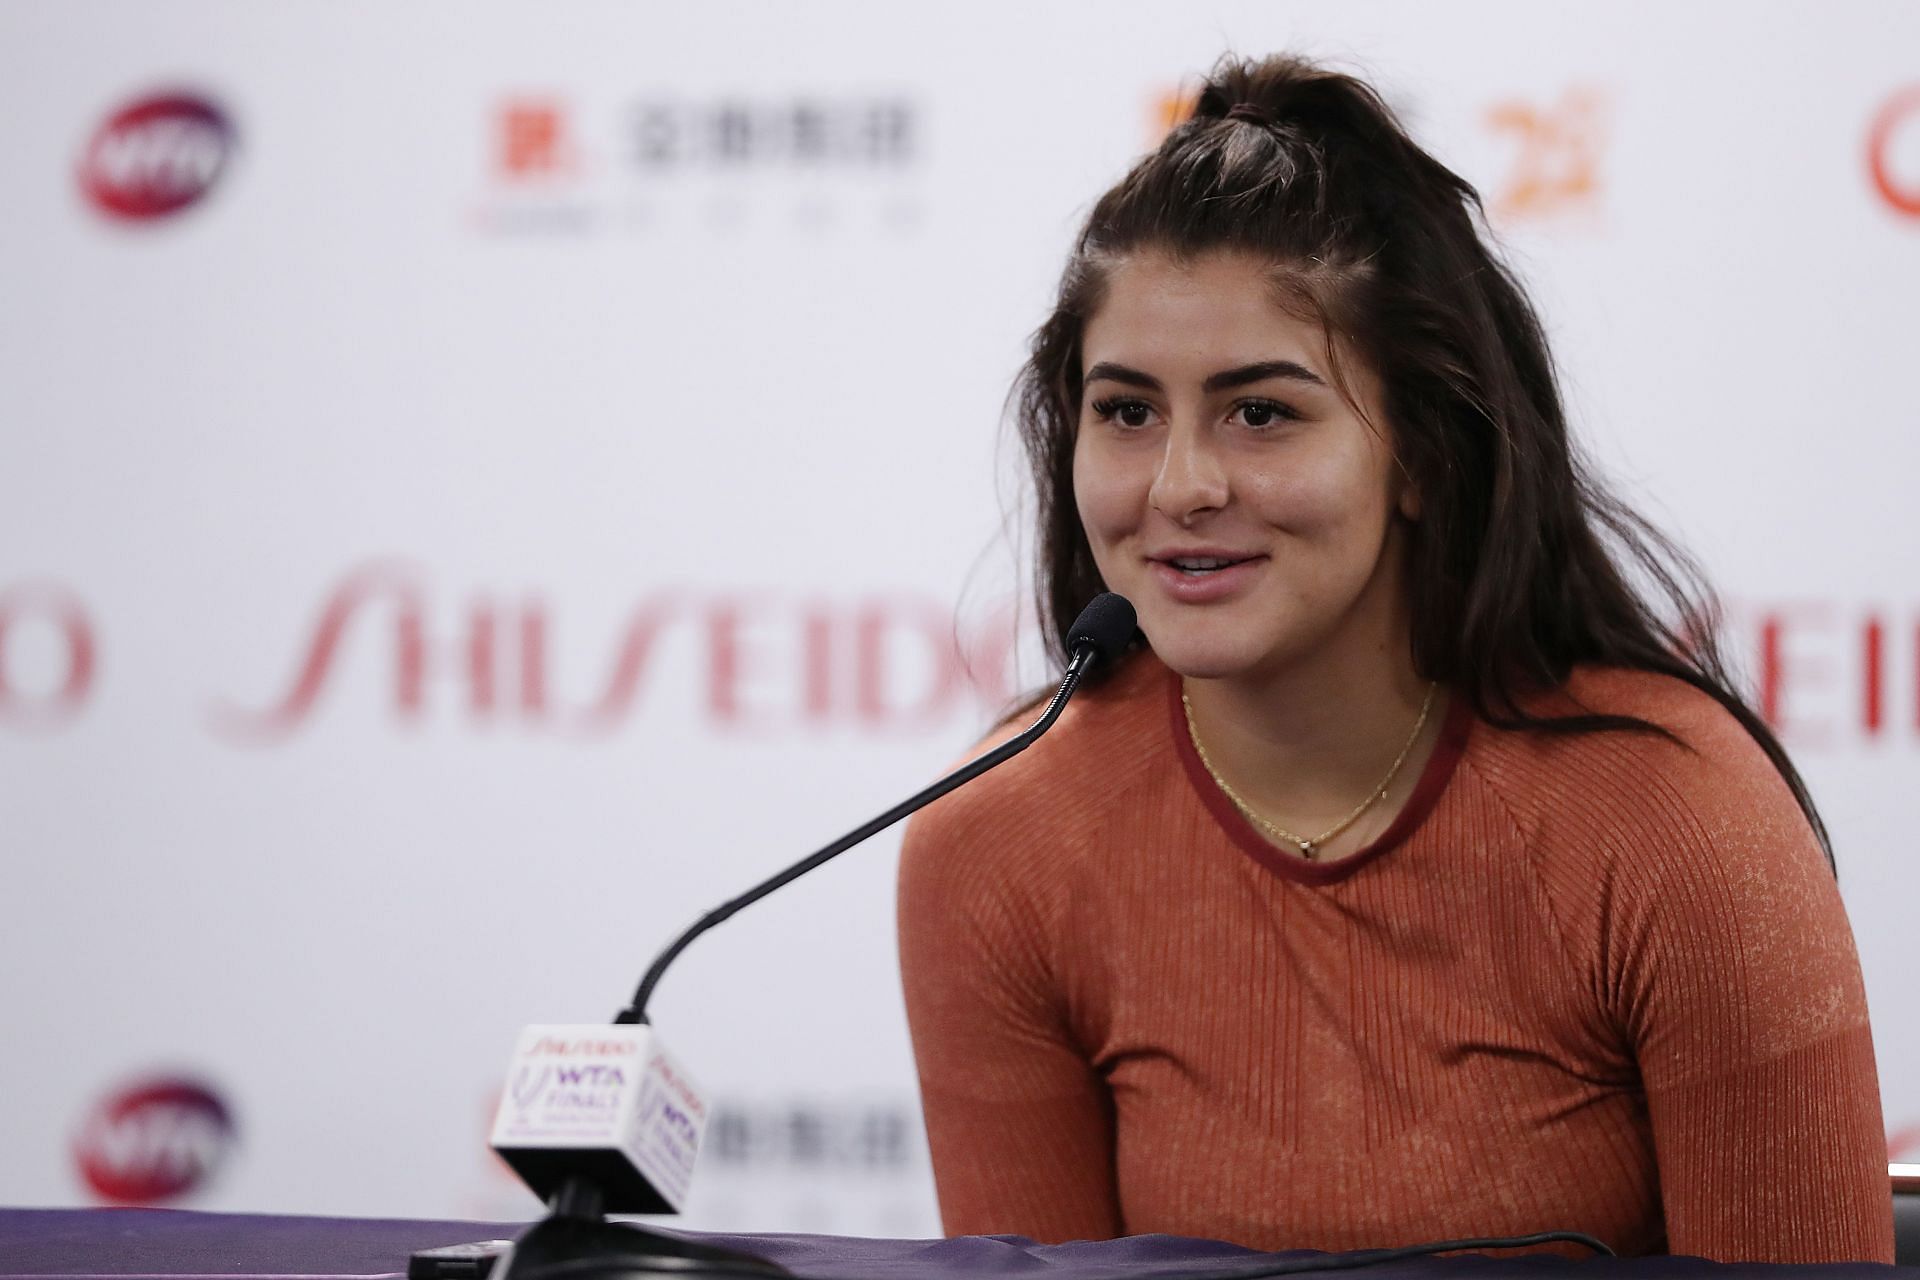 Bianca Andreescu reveals hilarious reason behind coming to Wimbledon as Canadian reaches career-best 3R at SW19